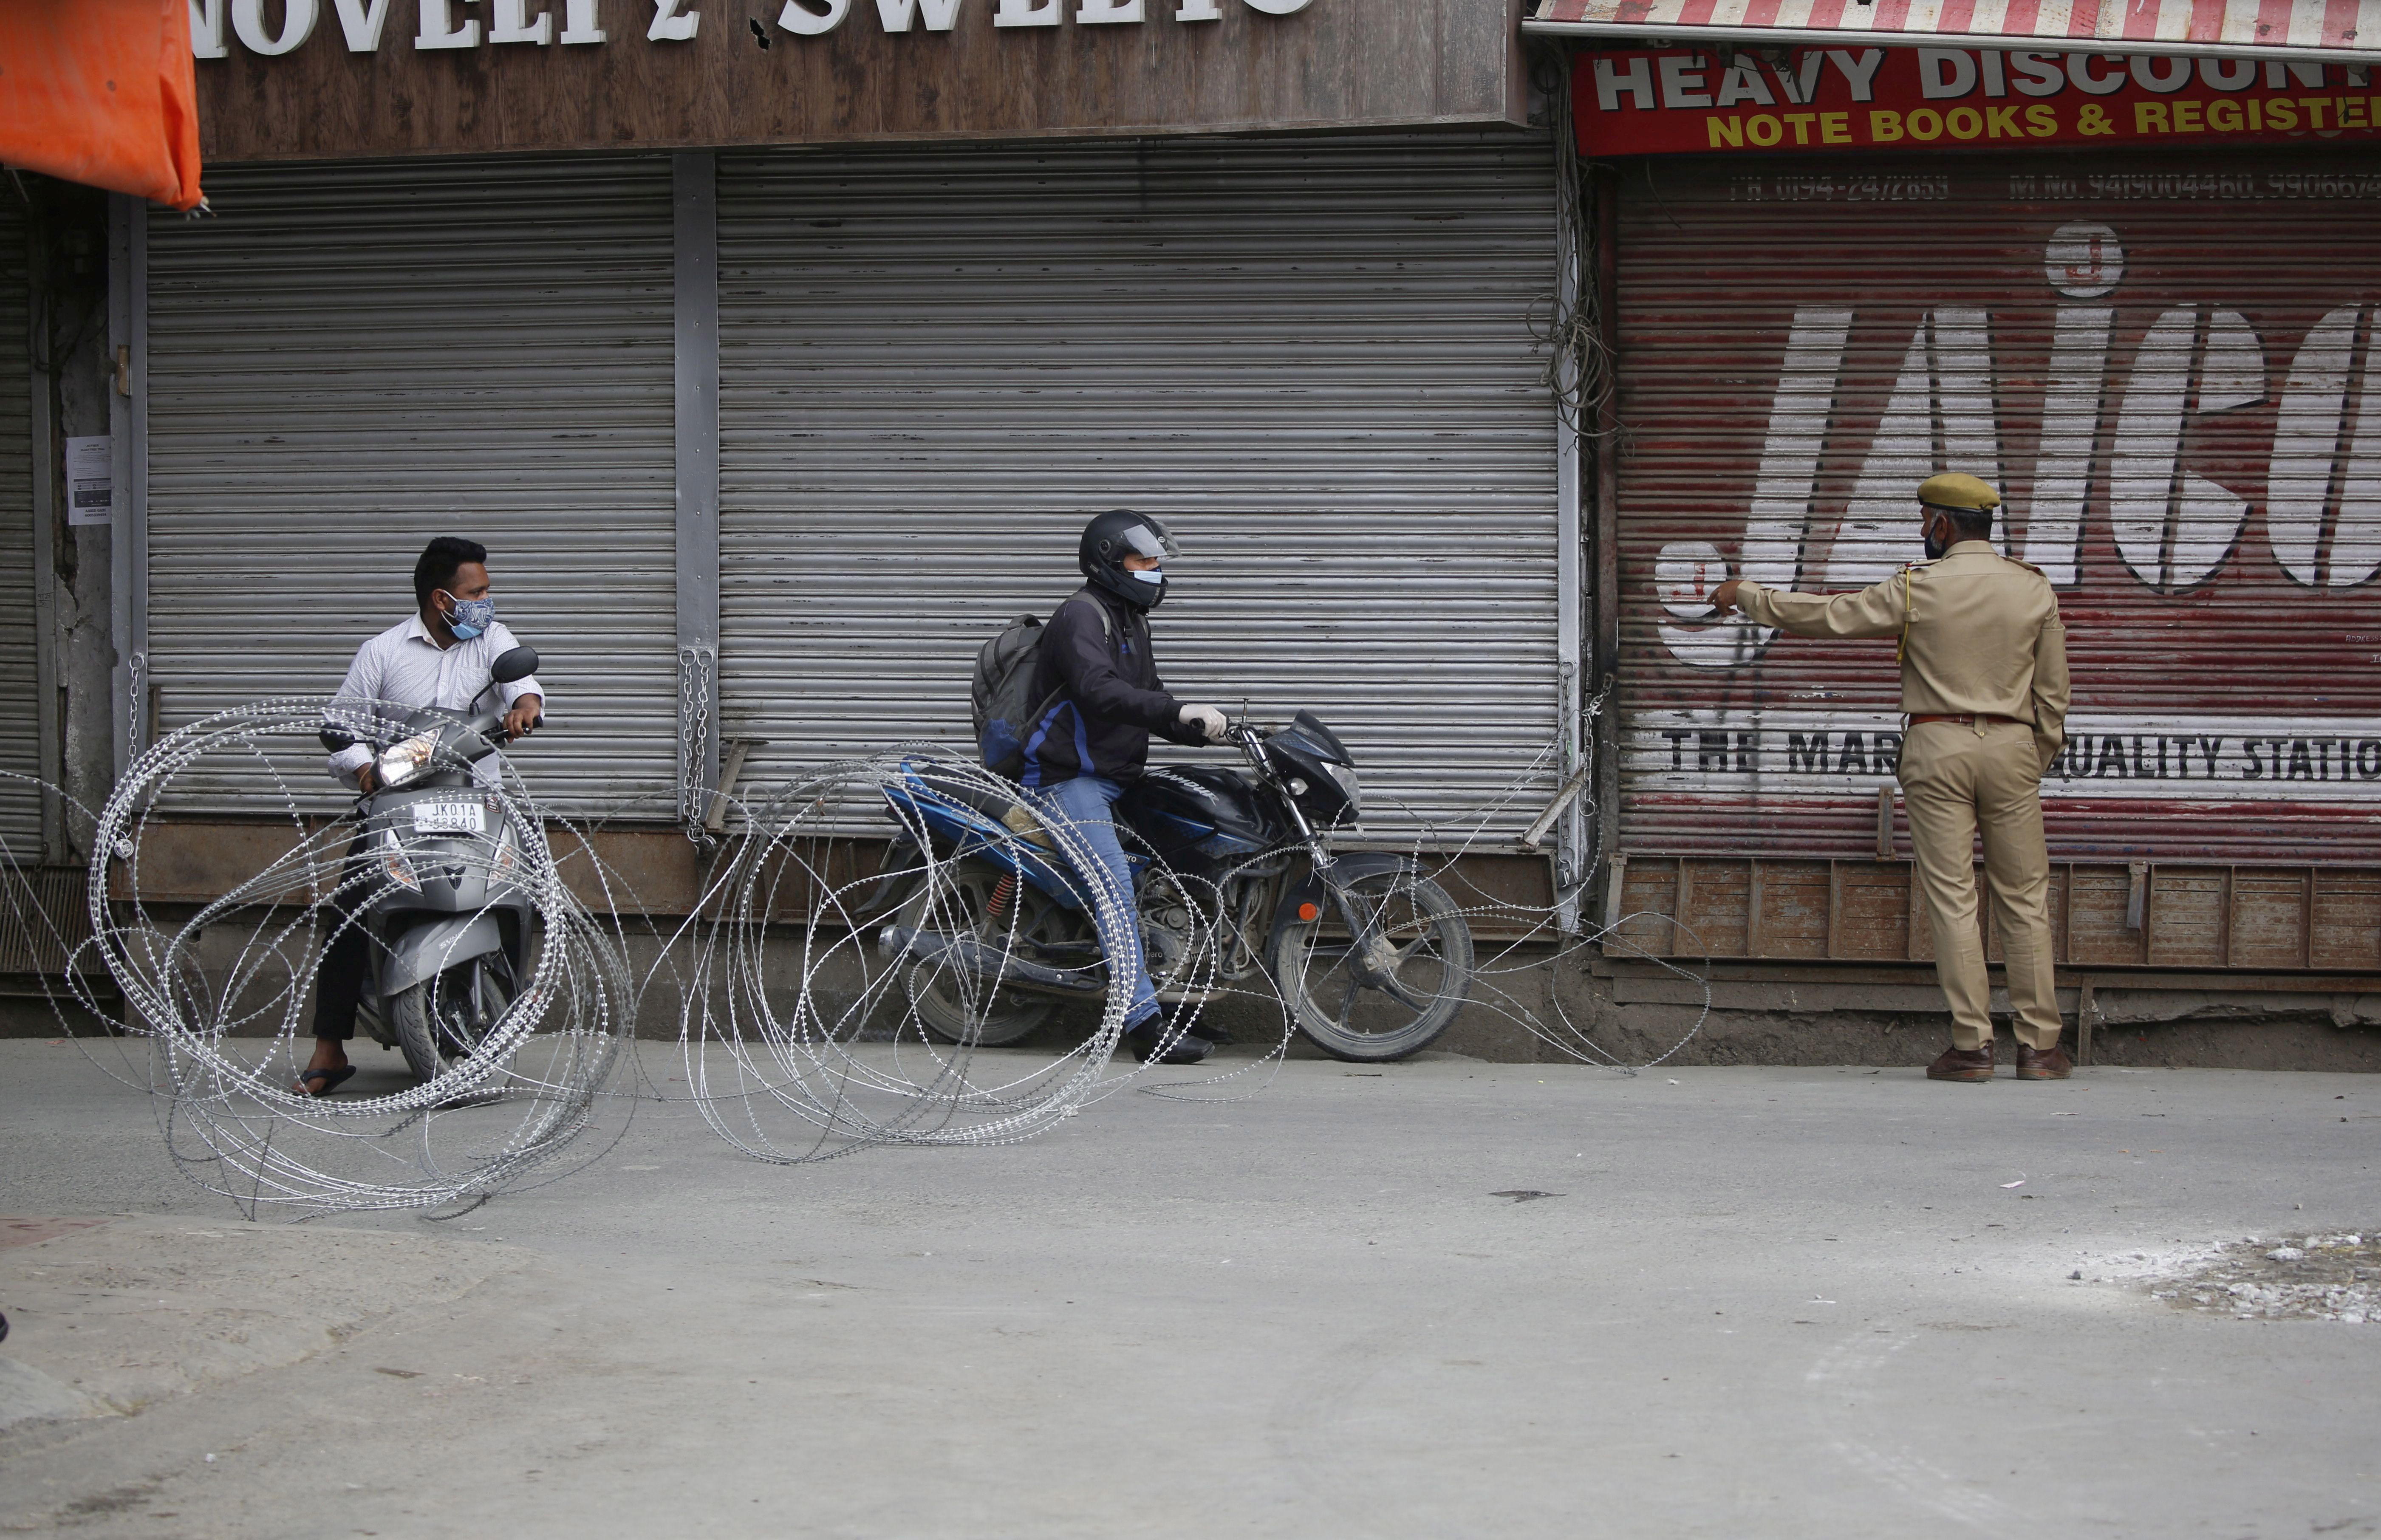 Srinagar (India), 06/05/2021.- Indian policemen stop people during lockdown in Srinagar, the summer capital of Indian Kashmir, 06 May 2021. Officials announced on 06 May that the Coronavirus death toll has now reached 2539 after 29 COVID19 patients lost their lives on 05 May. In view of the rising COVID-19 cases and to contain its spread, the government extended the curfew till 10 May 2021 in four districts of Jammu and Kashmir including Srinagar and Jammu. EFE/EPA/FAROOQ KHAN